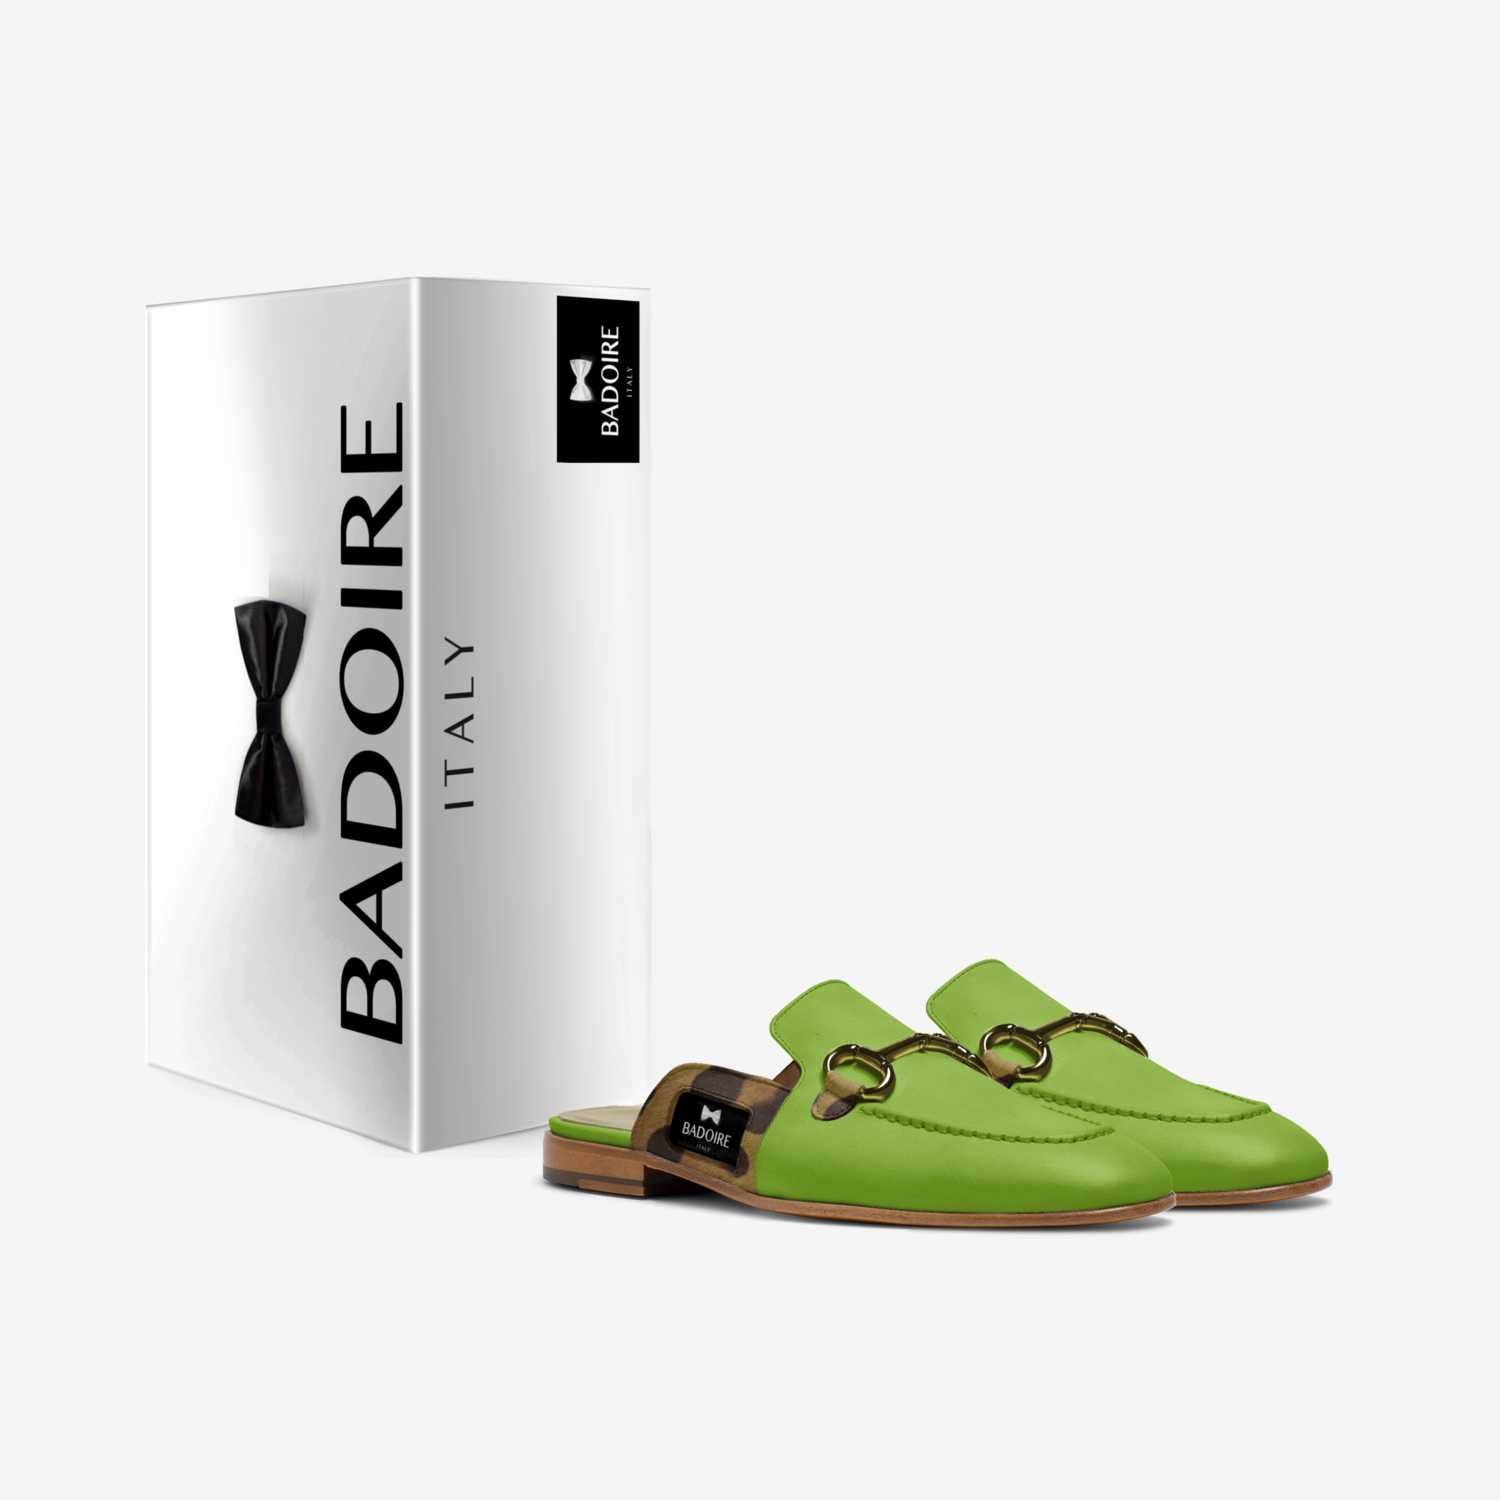 Nav 2.0 custom made in Italy shoes by Battle Badoire | Box view